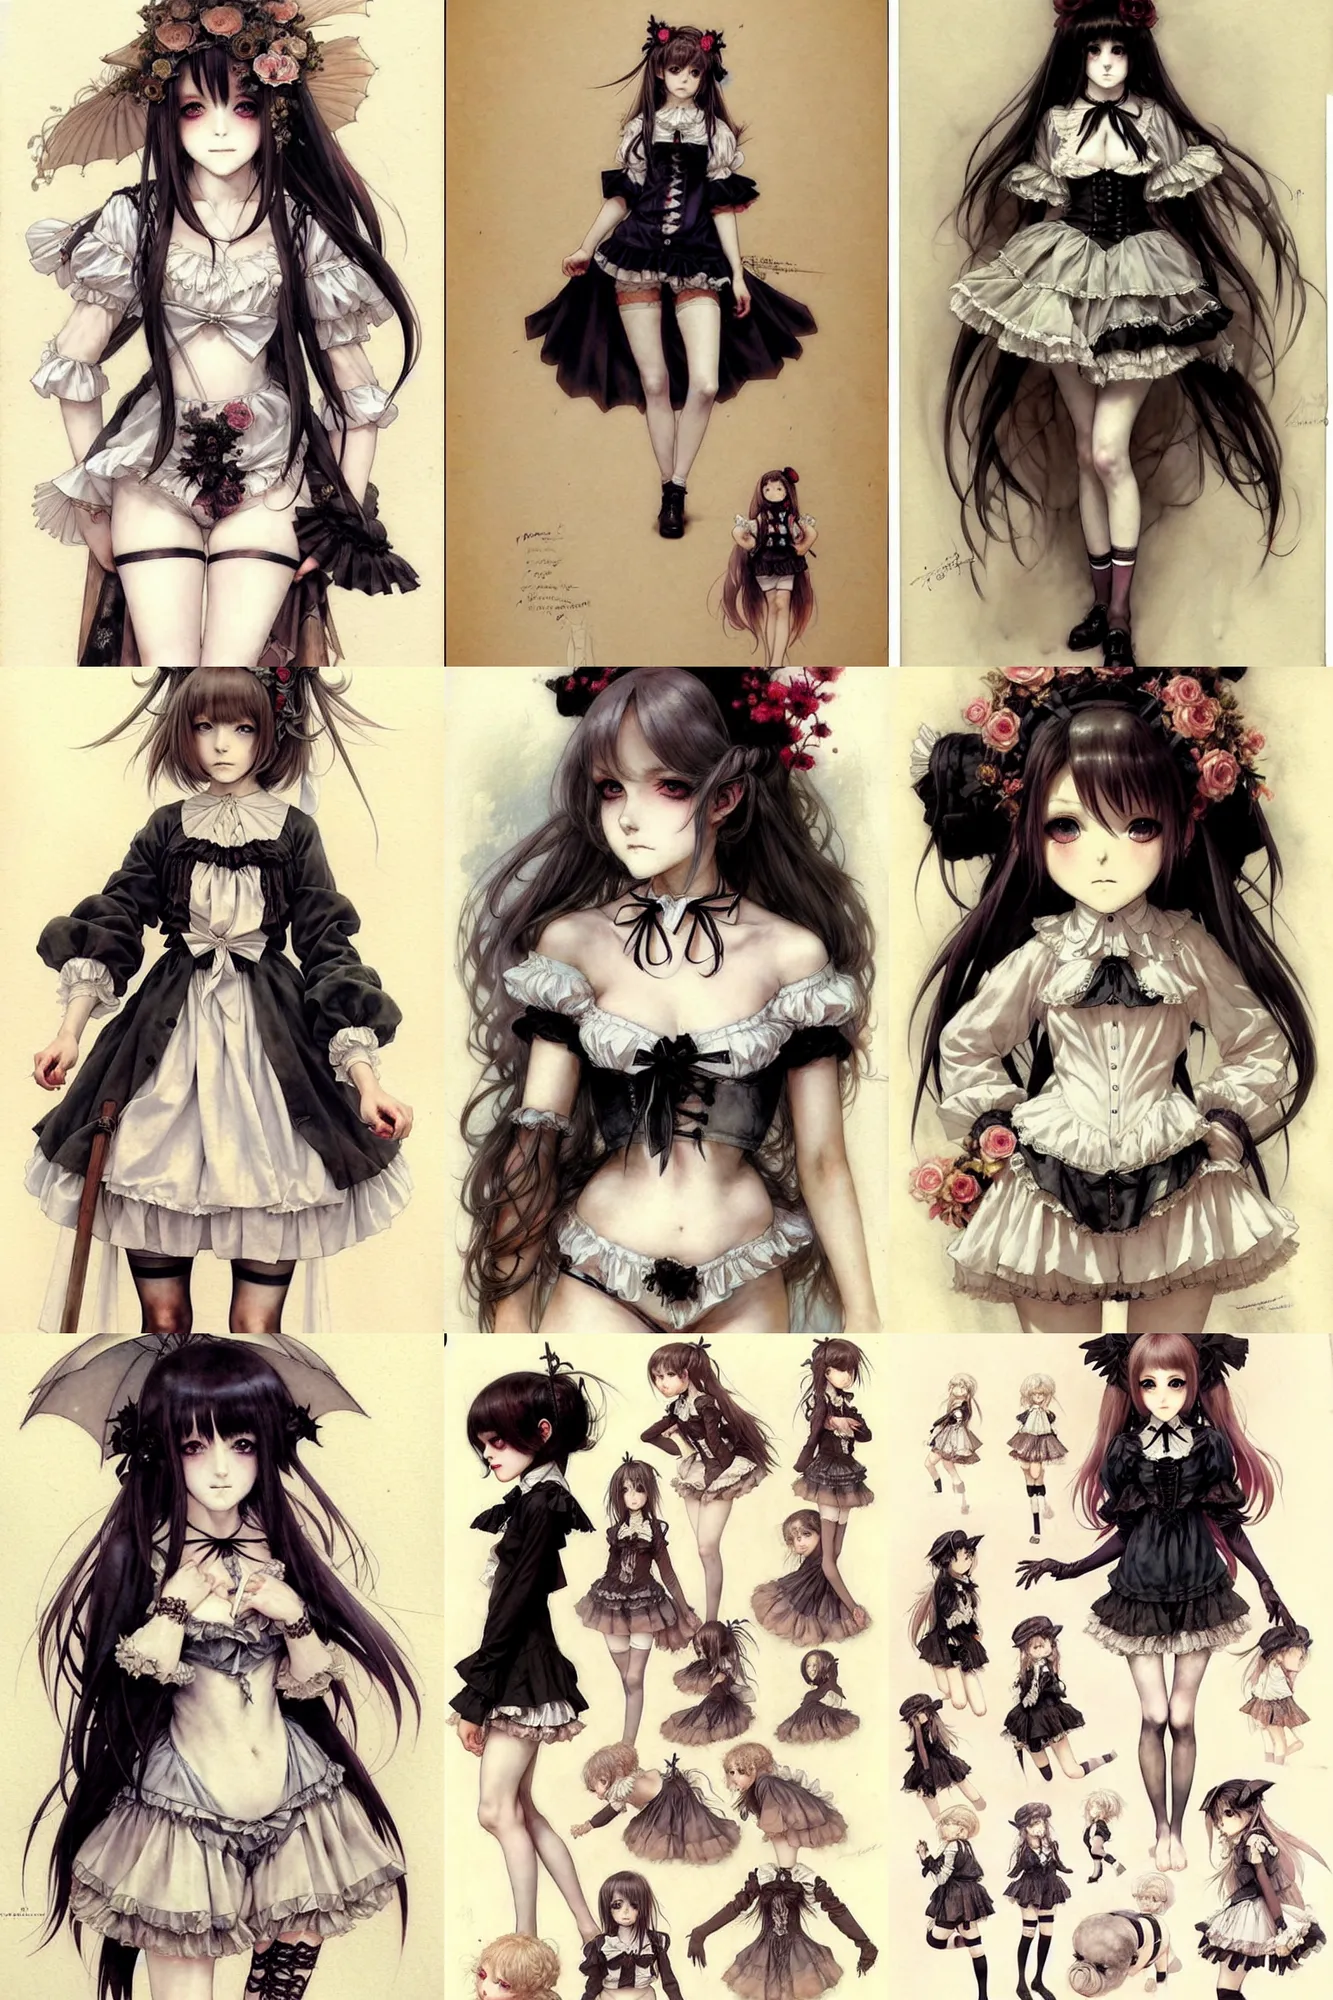 Loli hairs reference for drawing anime and manga character